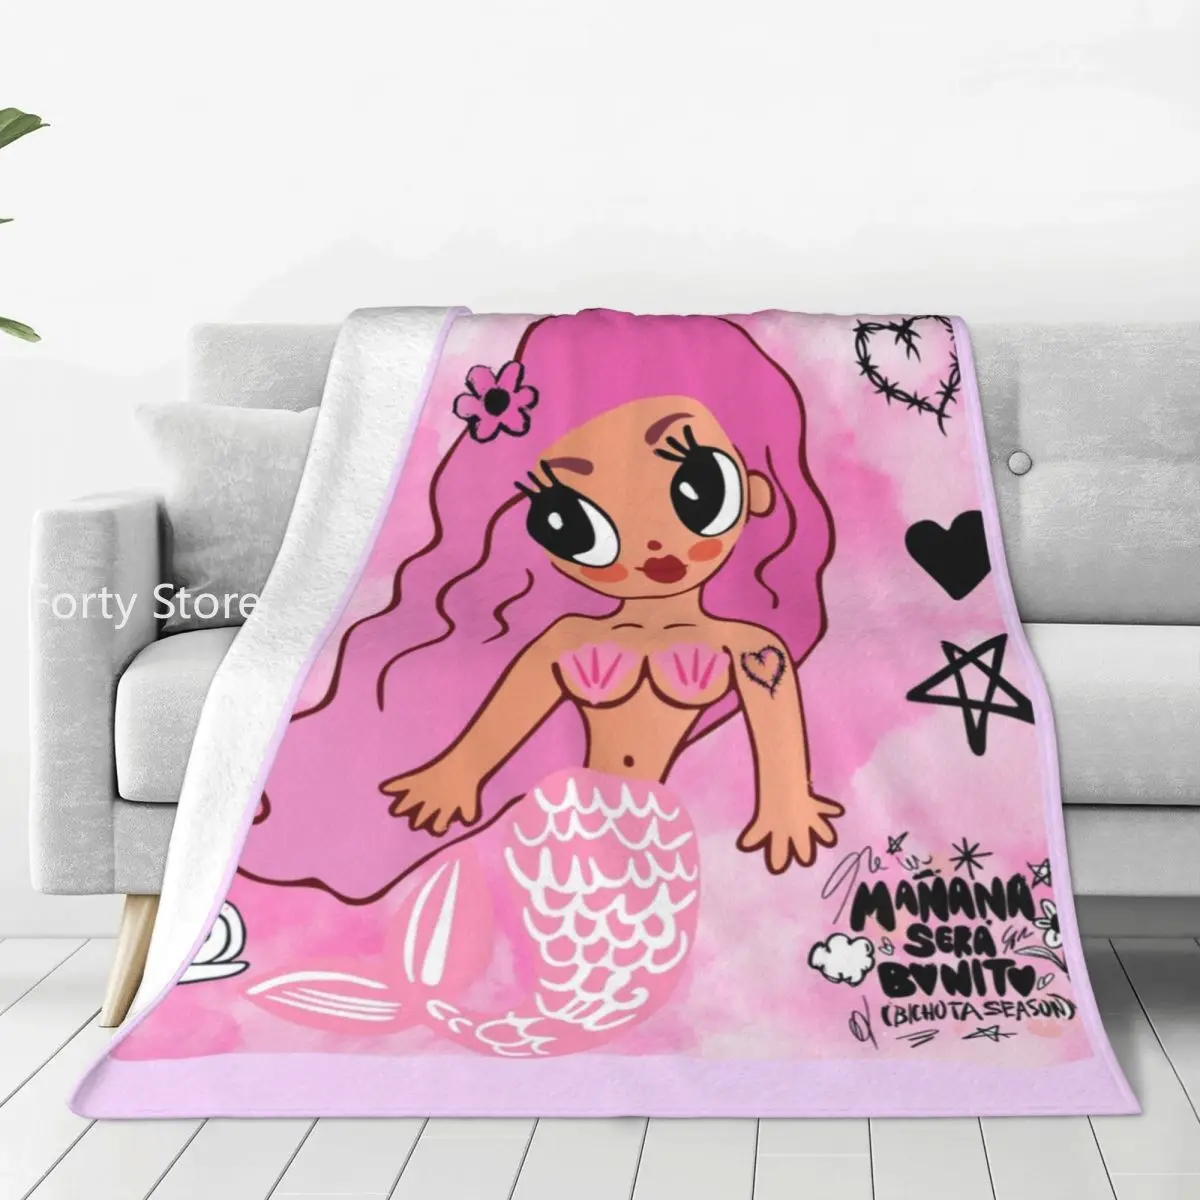 

Soft Warm Blankets Camping Karol G With Pink Hair Throw Blanket Pretty Girl Heart Flannel Bedspread Bedroom Sofa Bed Cover